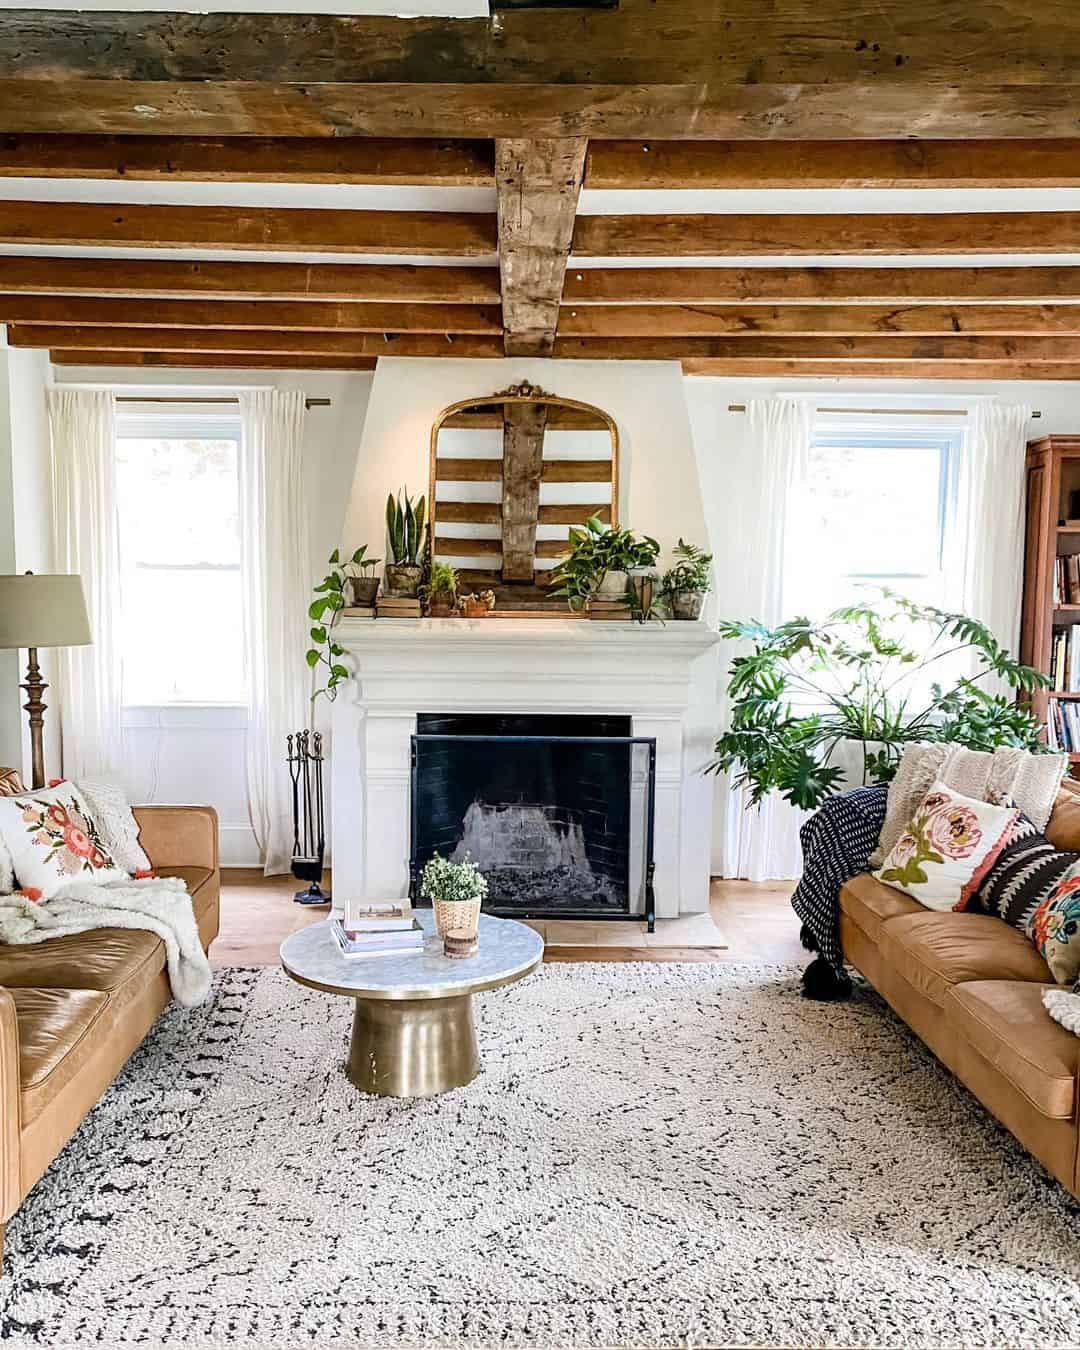 Boho Living Room With Two Tan Leather Sofas - Soul & Lane